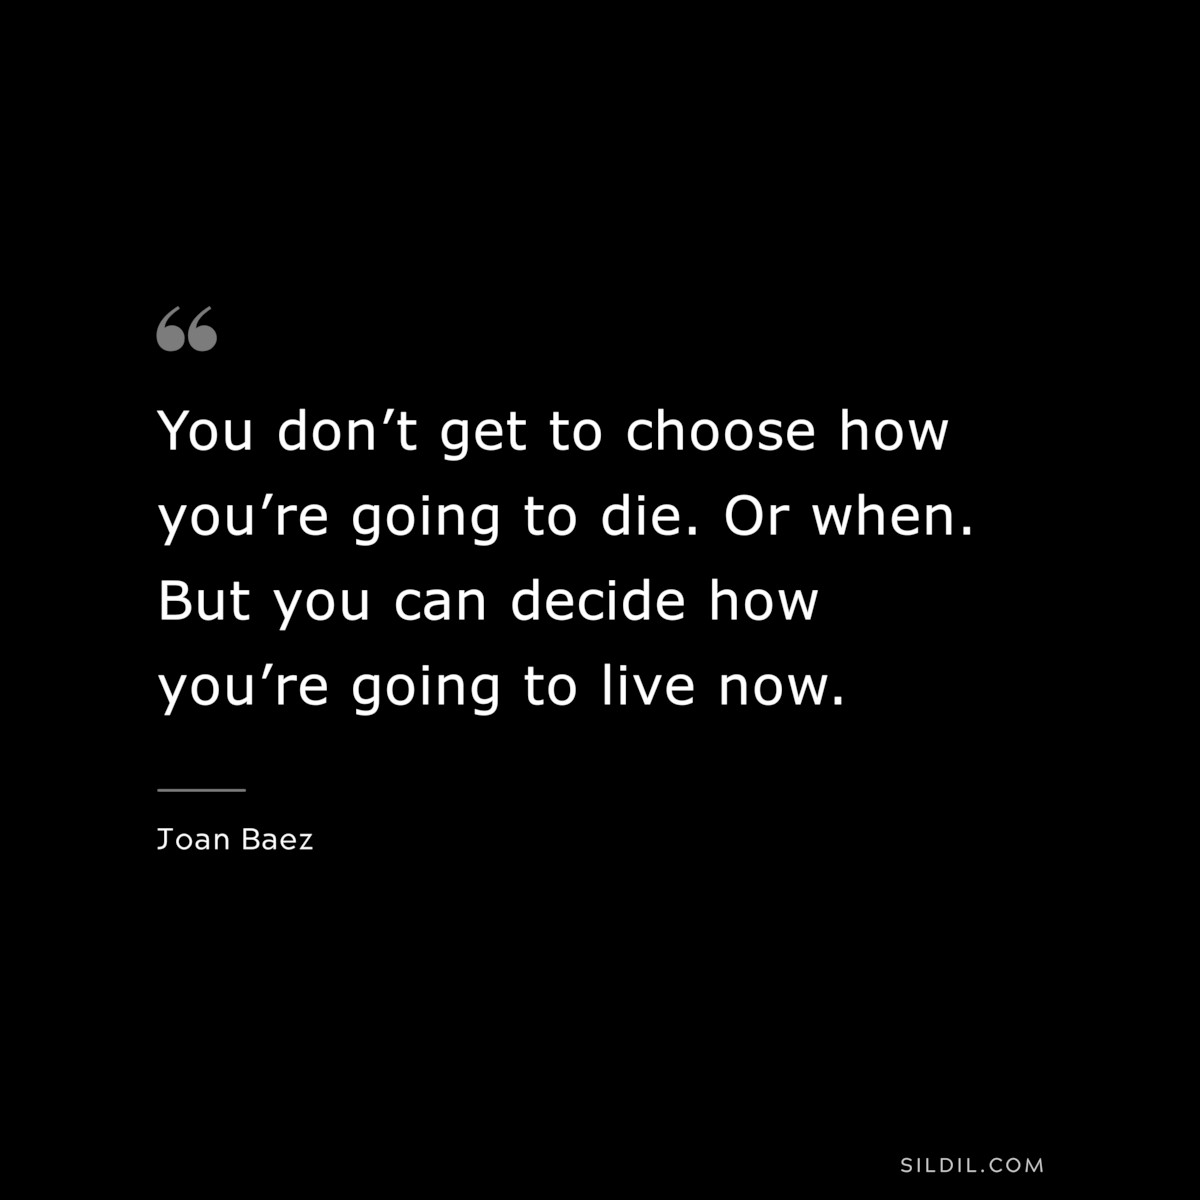 You don’t get to choose how you’re going to die. Or when. But you can decide how you’re going to live now. ― Joan Baez